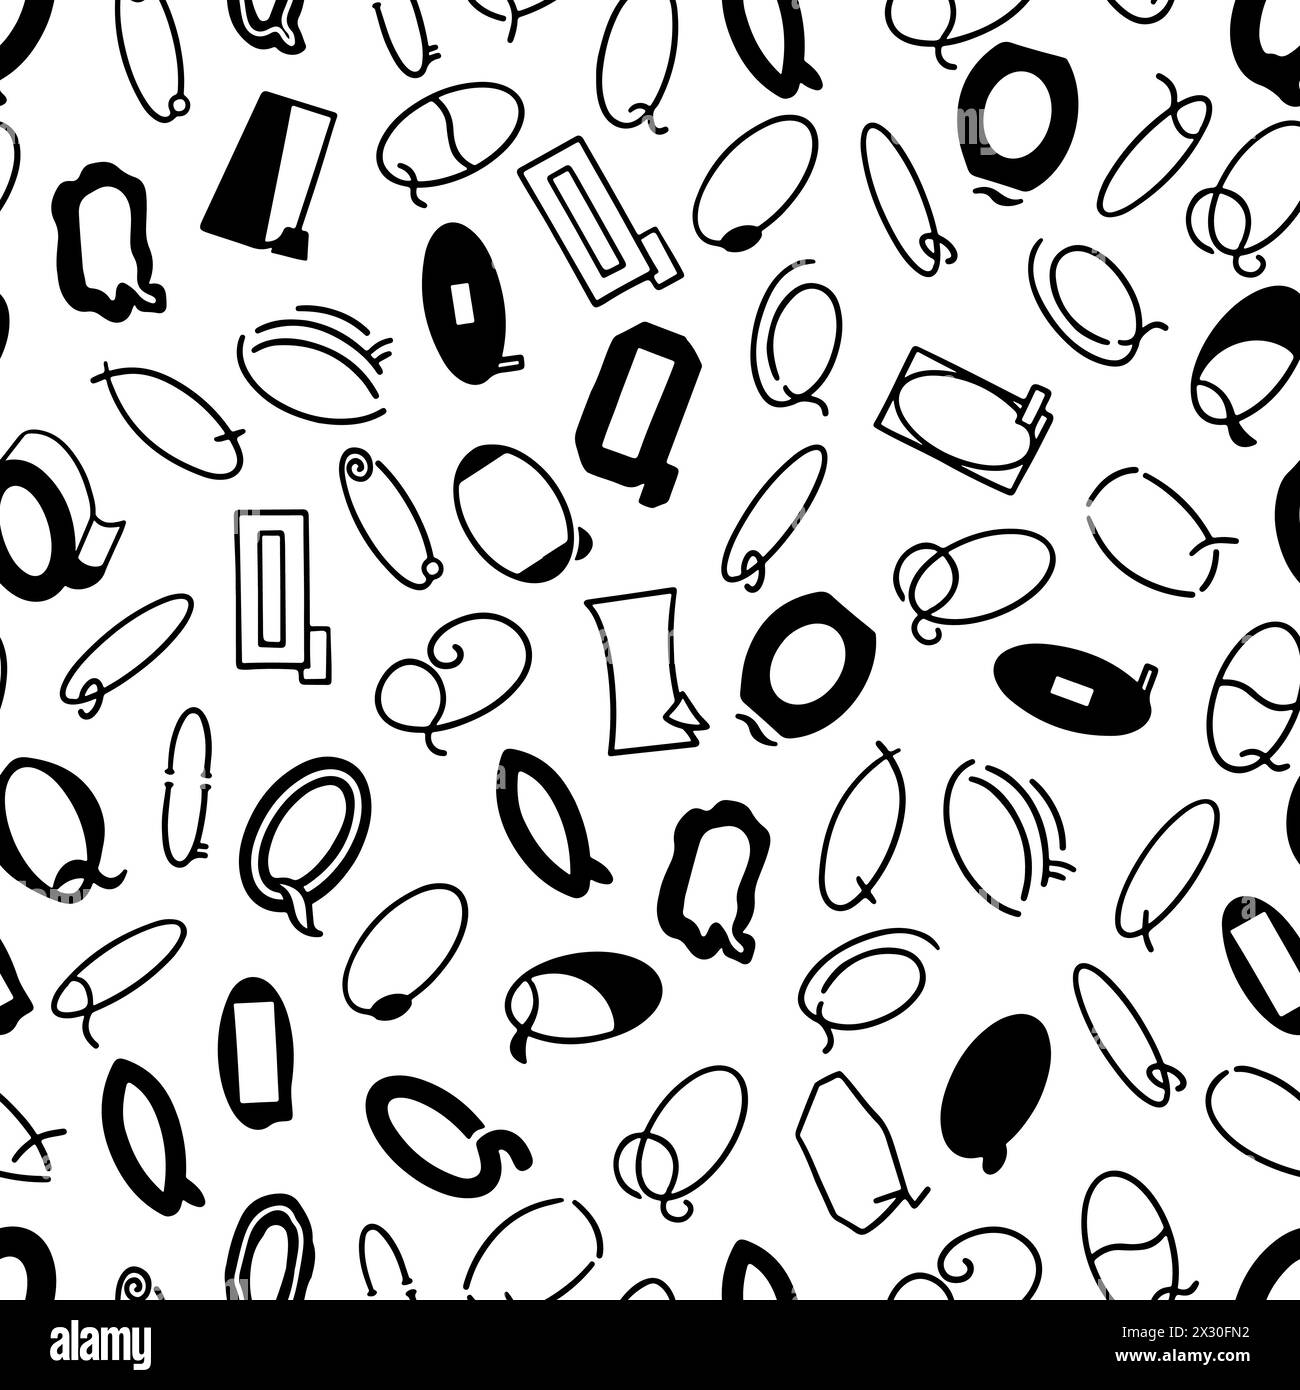 A monochrome pattern with a variety of letters Q scattered in different orientations Stock Vector